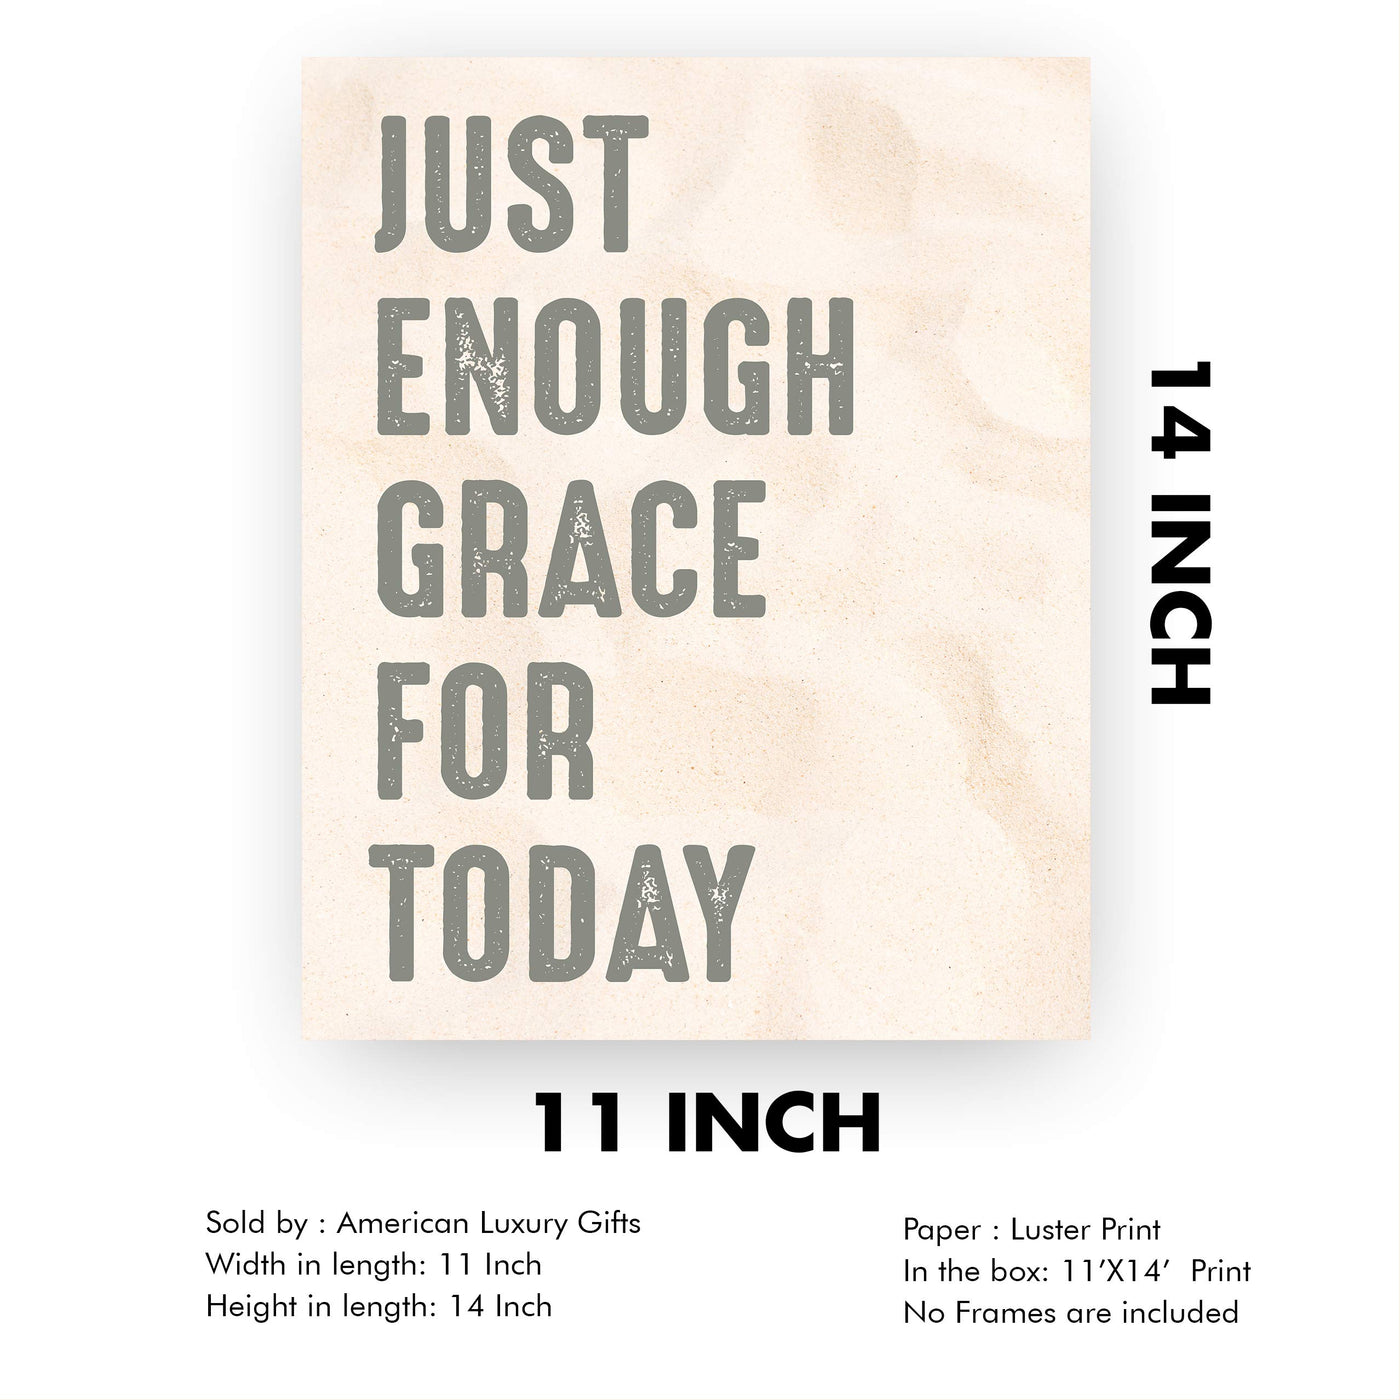 Just Enough Grace for Today Inspirational Quotes Wall Art-11 x 14" Christian Poster Print-Ready to Frame. Modern Typographic Design. Motivational Decor for Home-Office-Farmhouse-Church. Great Gift!